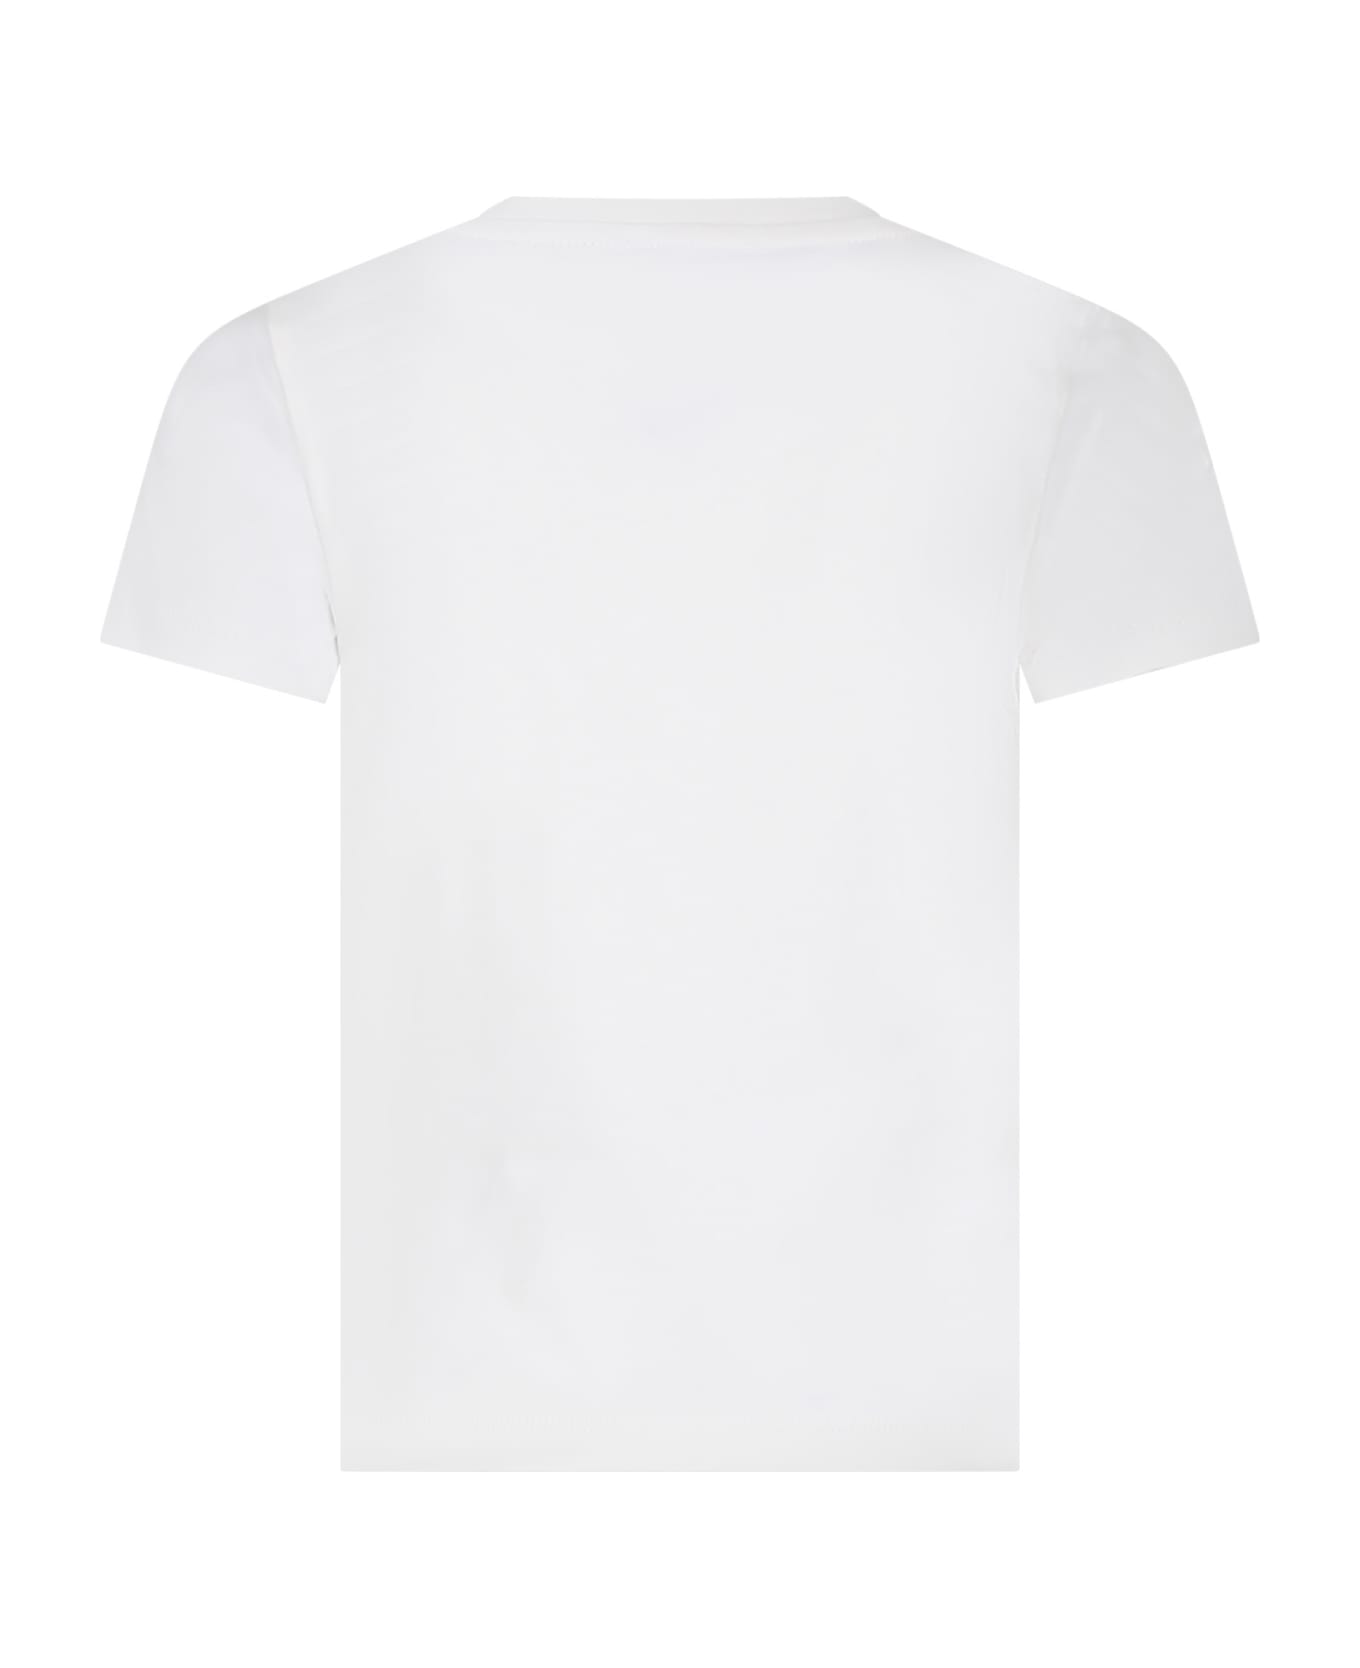 Kenzo Kids White T-shirt For Boy With Logo - Bianco Tシャツ＆ポロシャツ